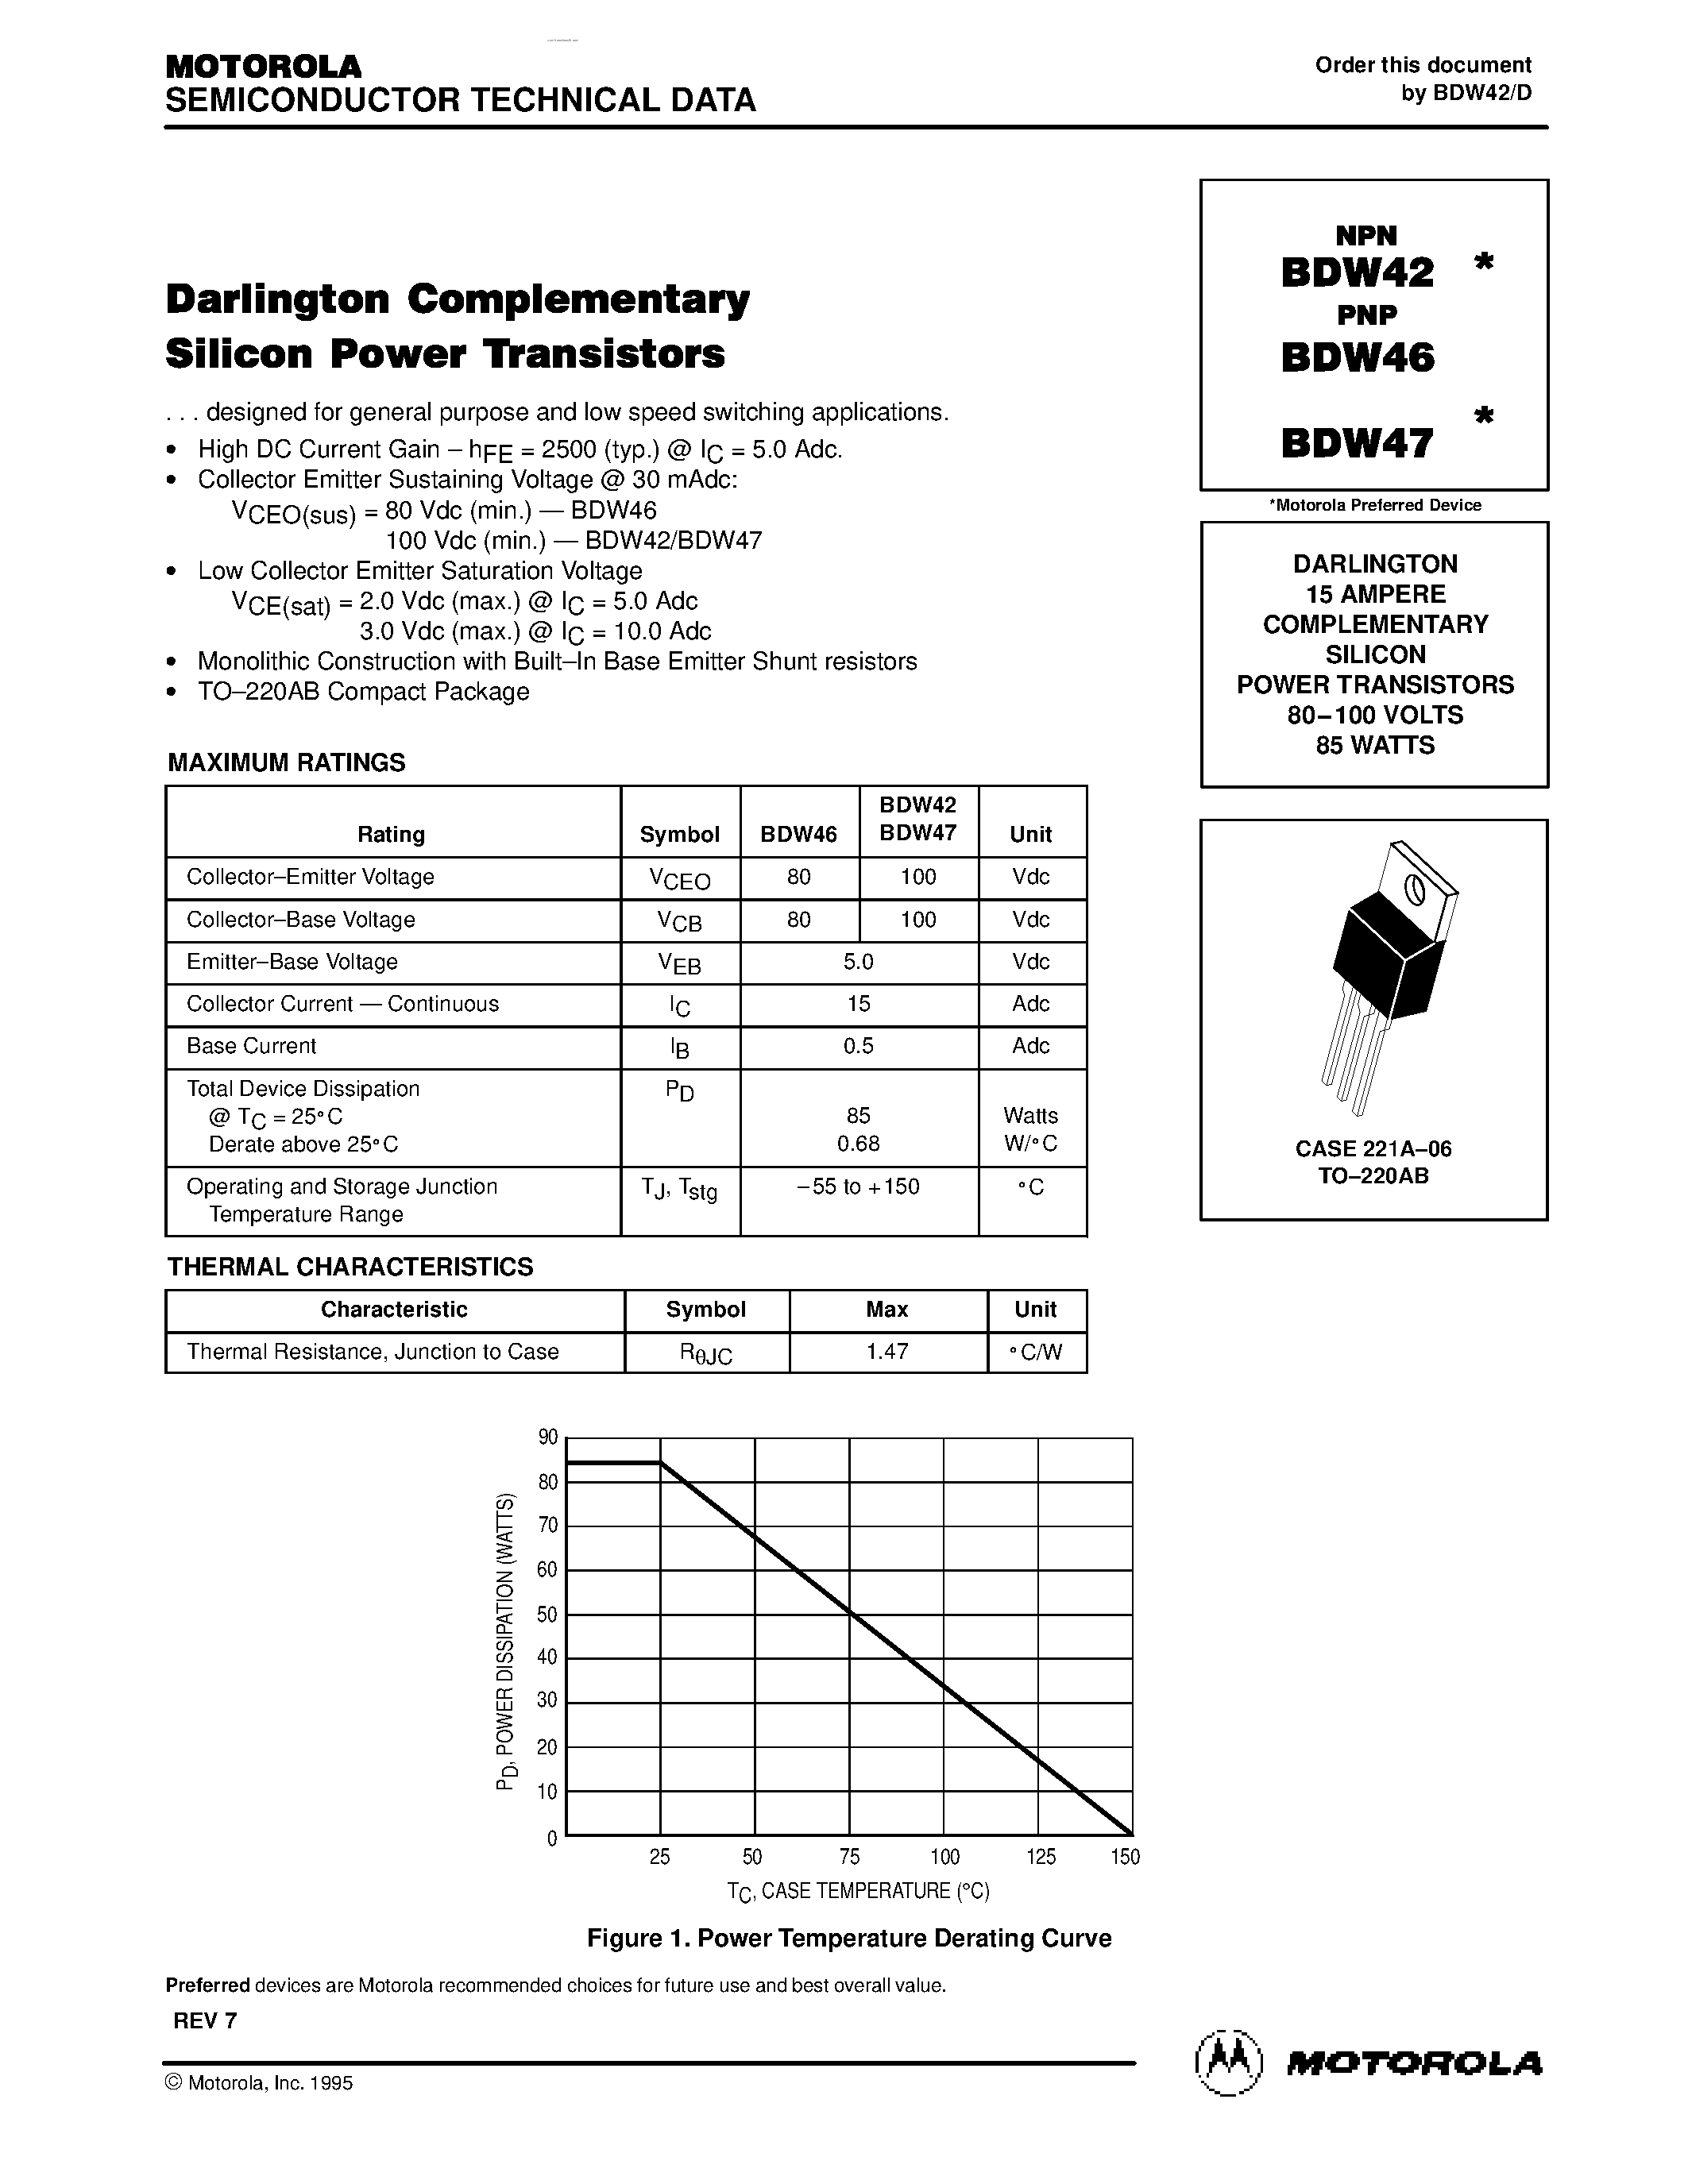 Даташит BDW47 - DARLINGTON COMPLEMENTARY SILICON POWER TRANSISTORS страница 1